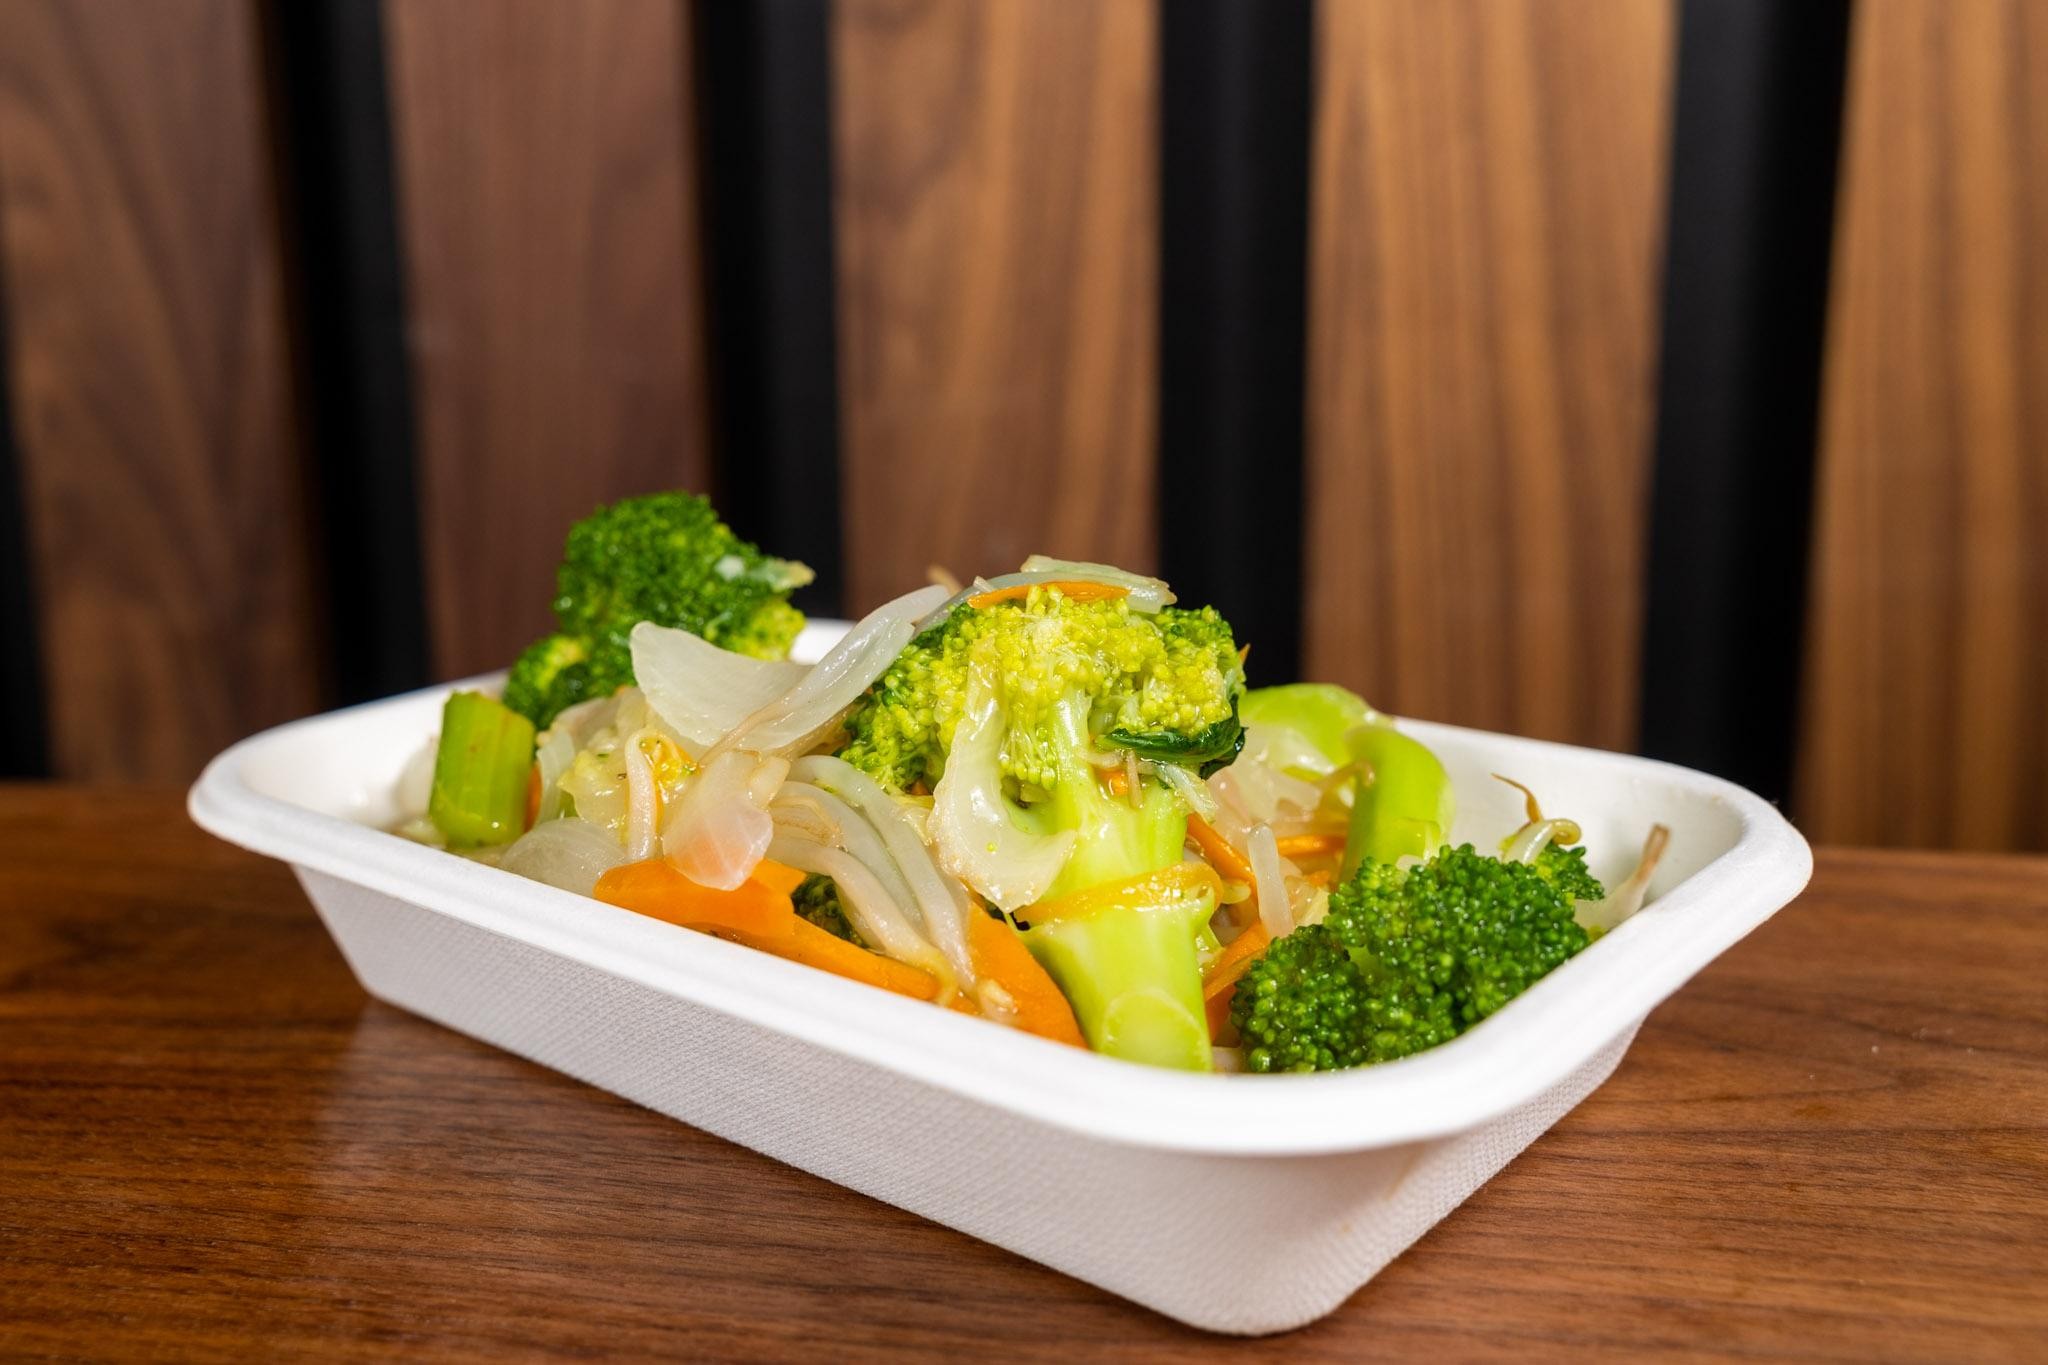 SAUTEED MIXED VEGETABLES (DIET)